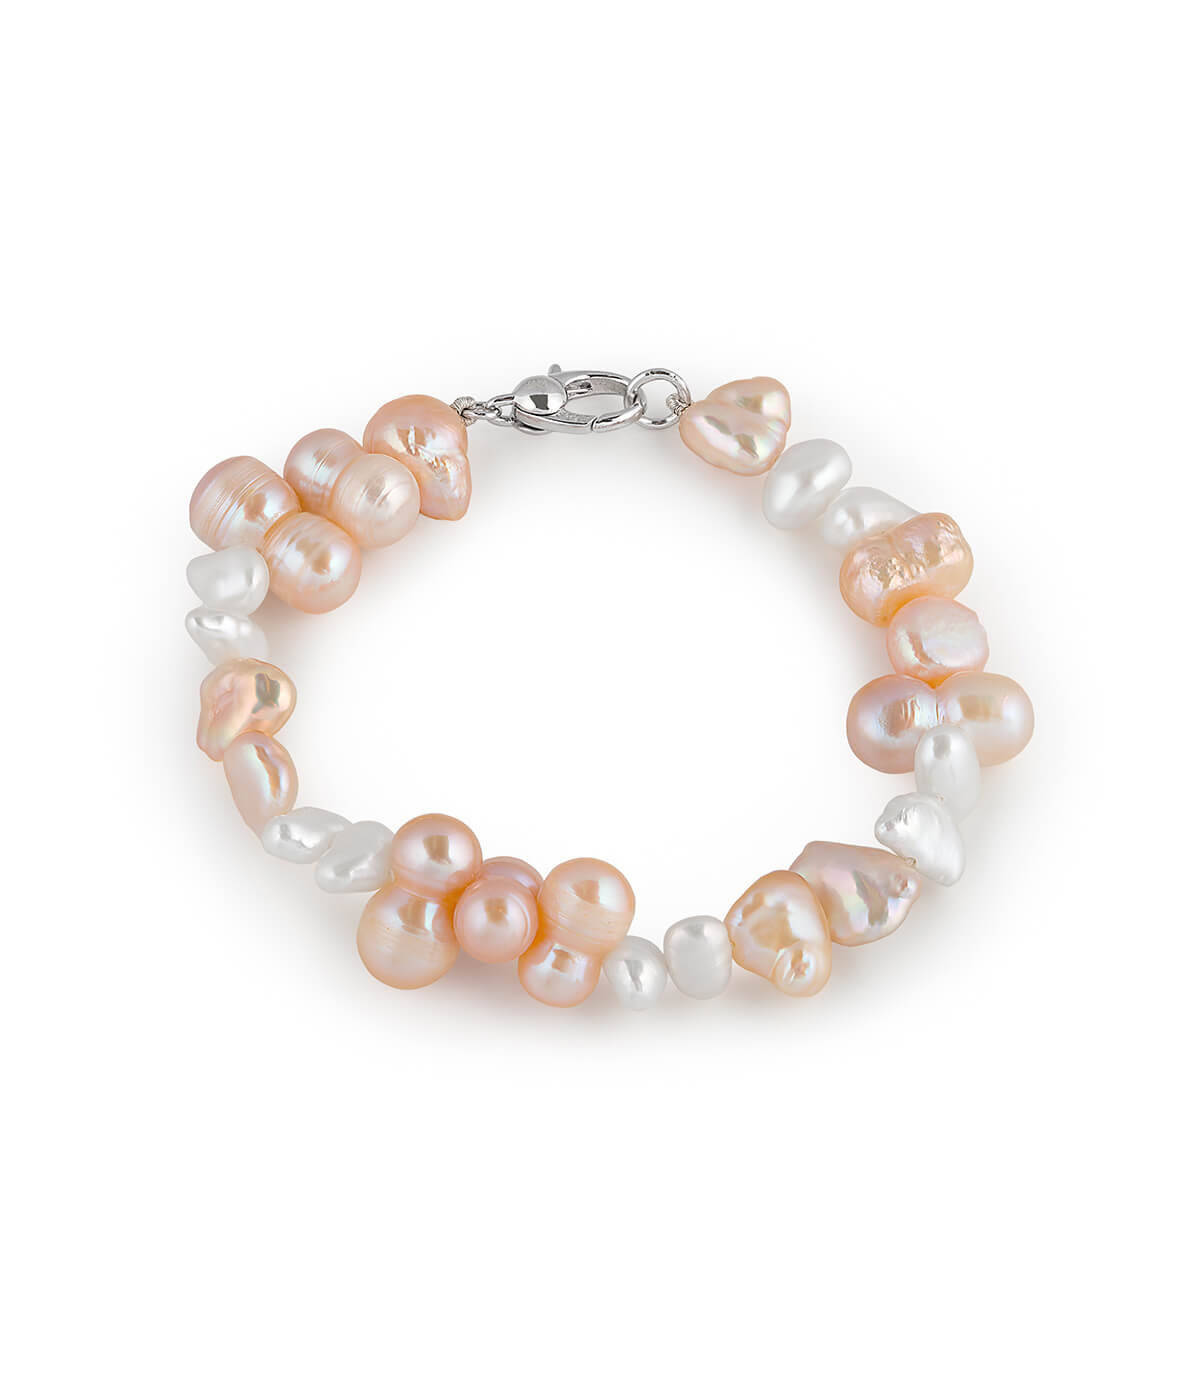 Pearl Bracelet Rhodium Plated Sterling Silver Lobster Clasp Peach White Baroque